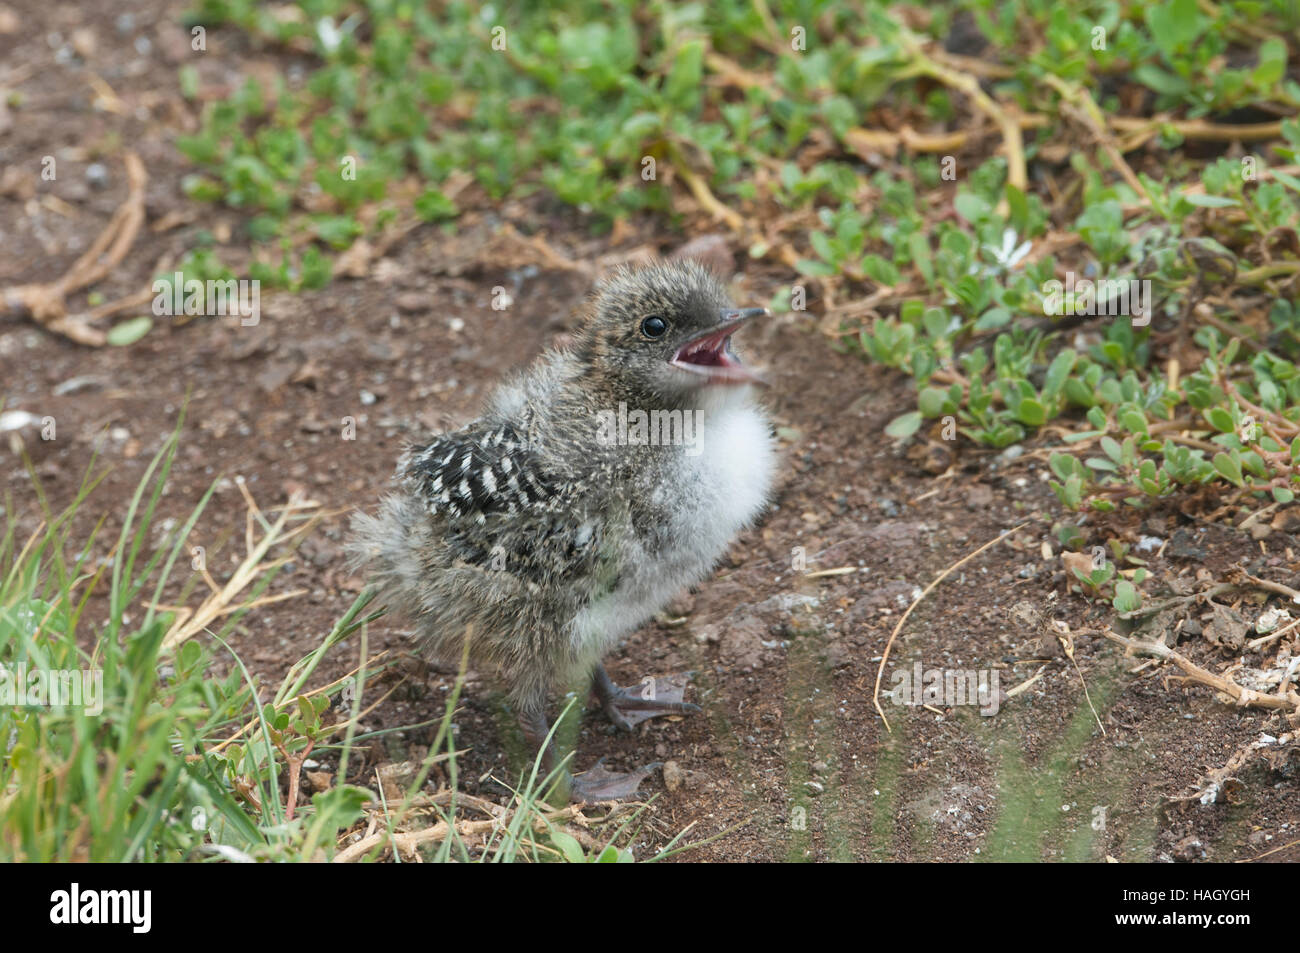 Very young Sooty Tern chick (Sterna fuscata), Lord Howe Island, New South Wales, NSW, Australia Stock Photo